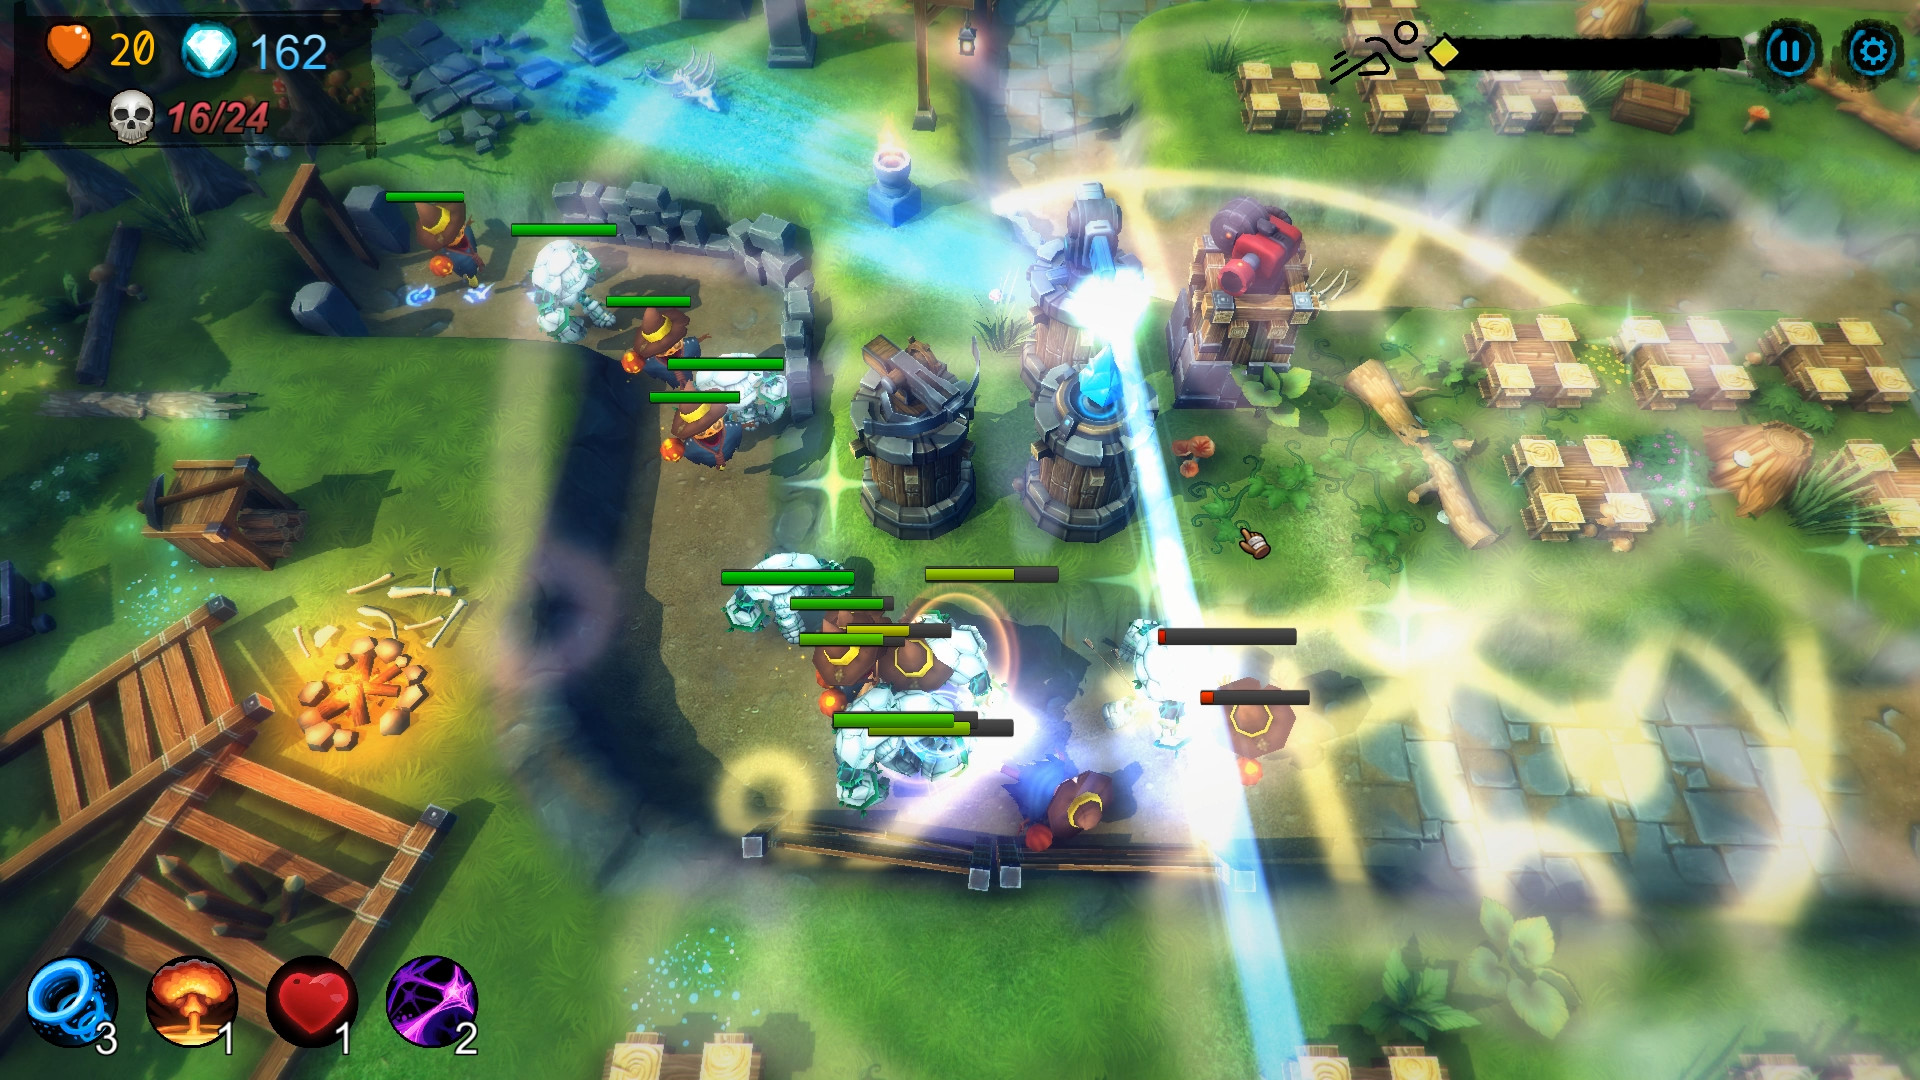 Yet another tower defence screenshot